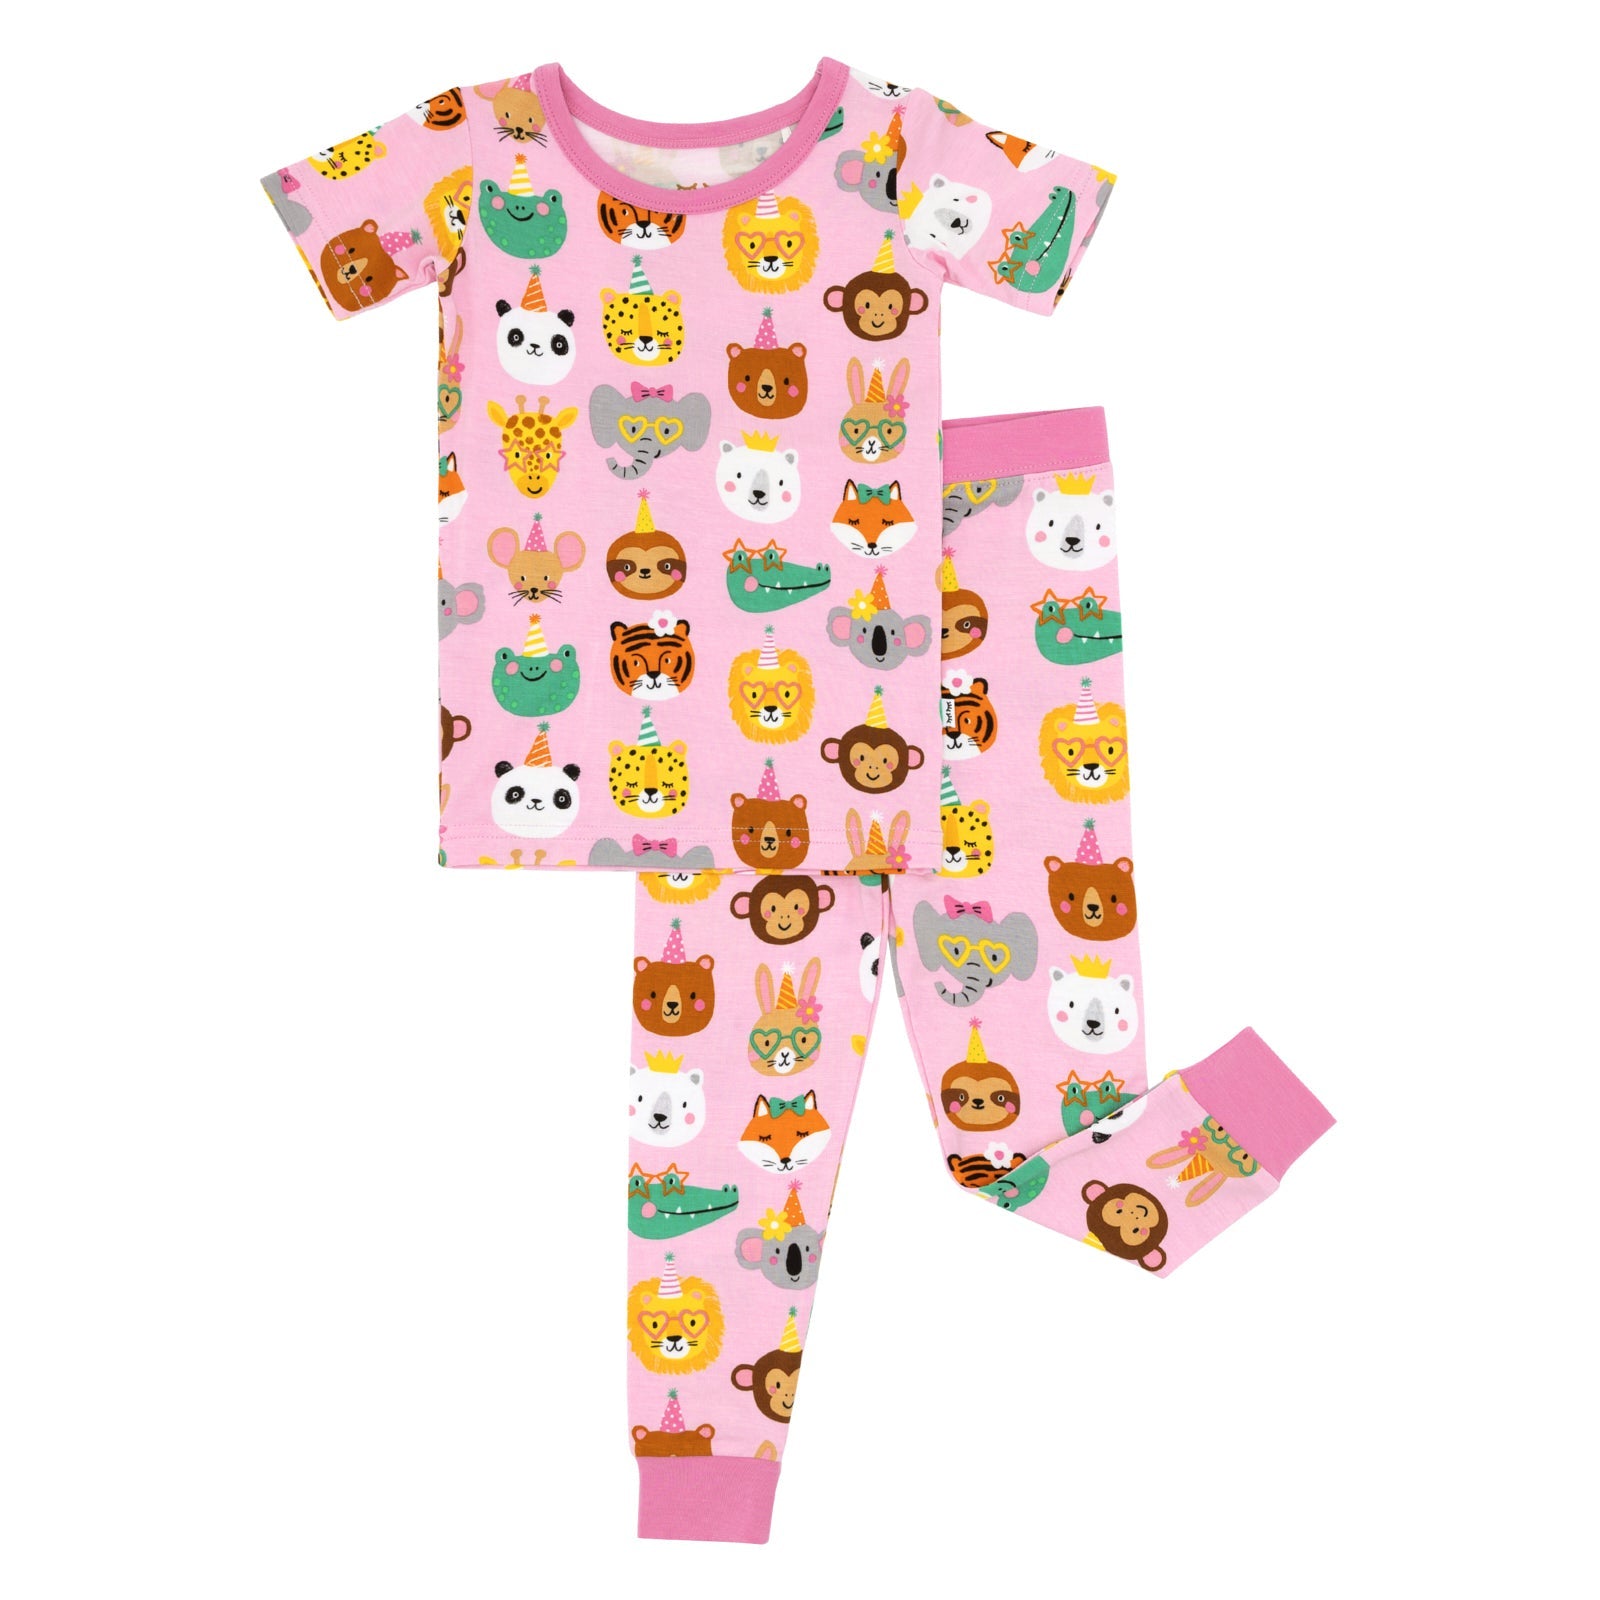 Flat lay image of a Pink Party Pals two piece short sleeve pj set